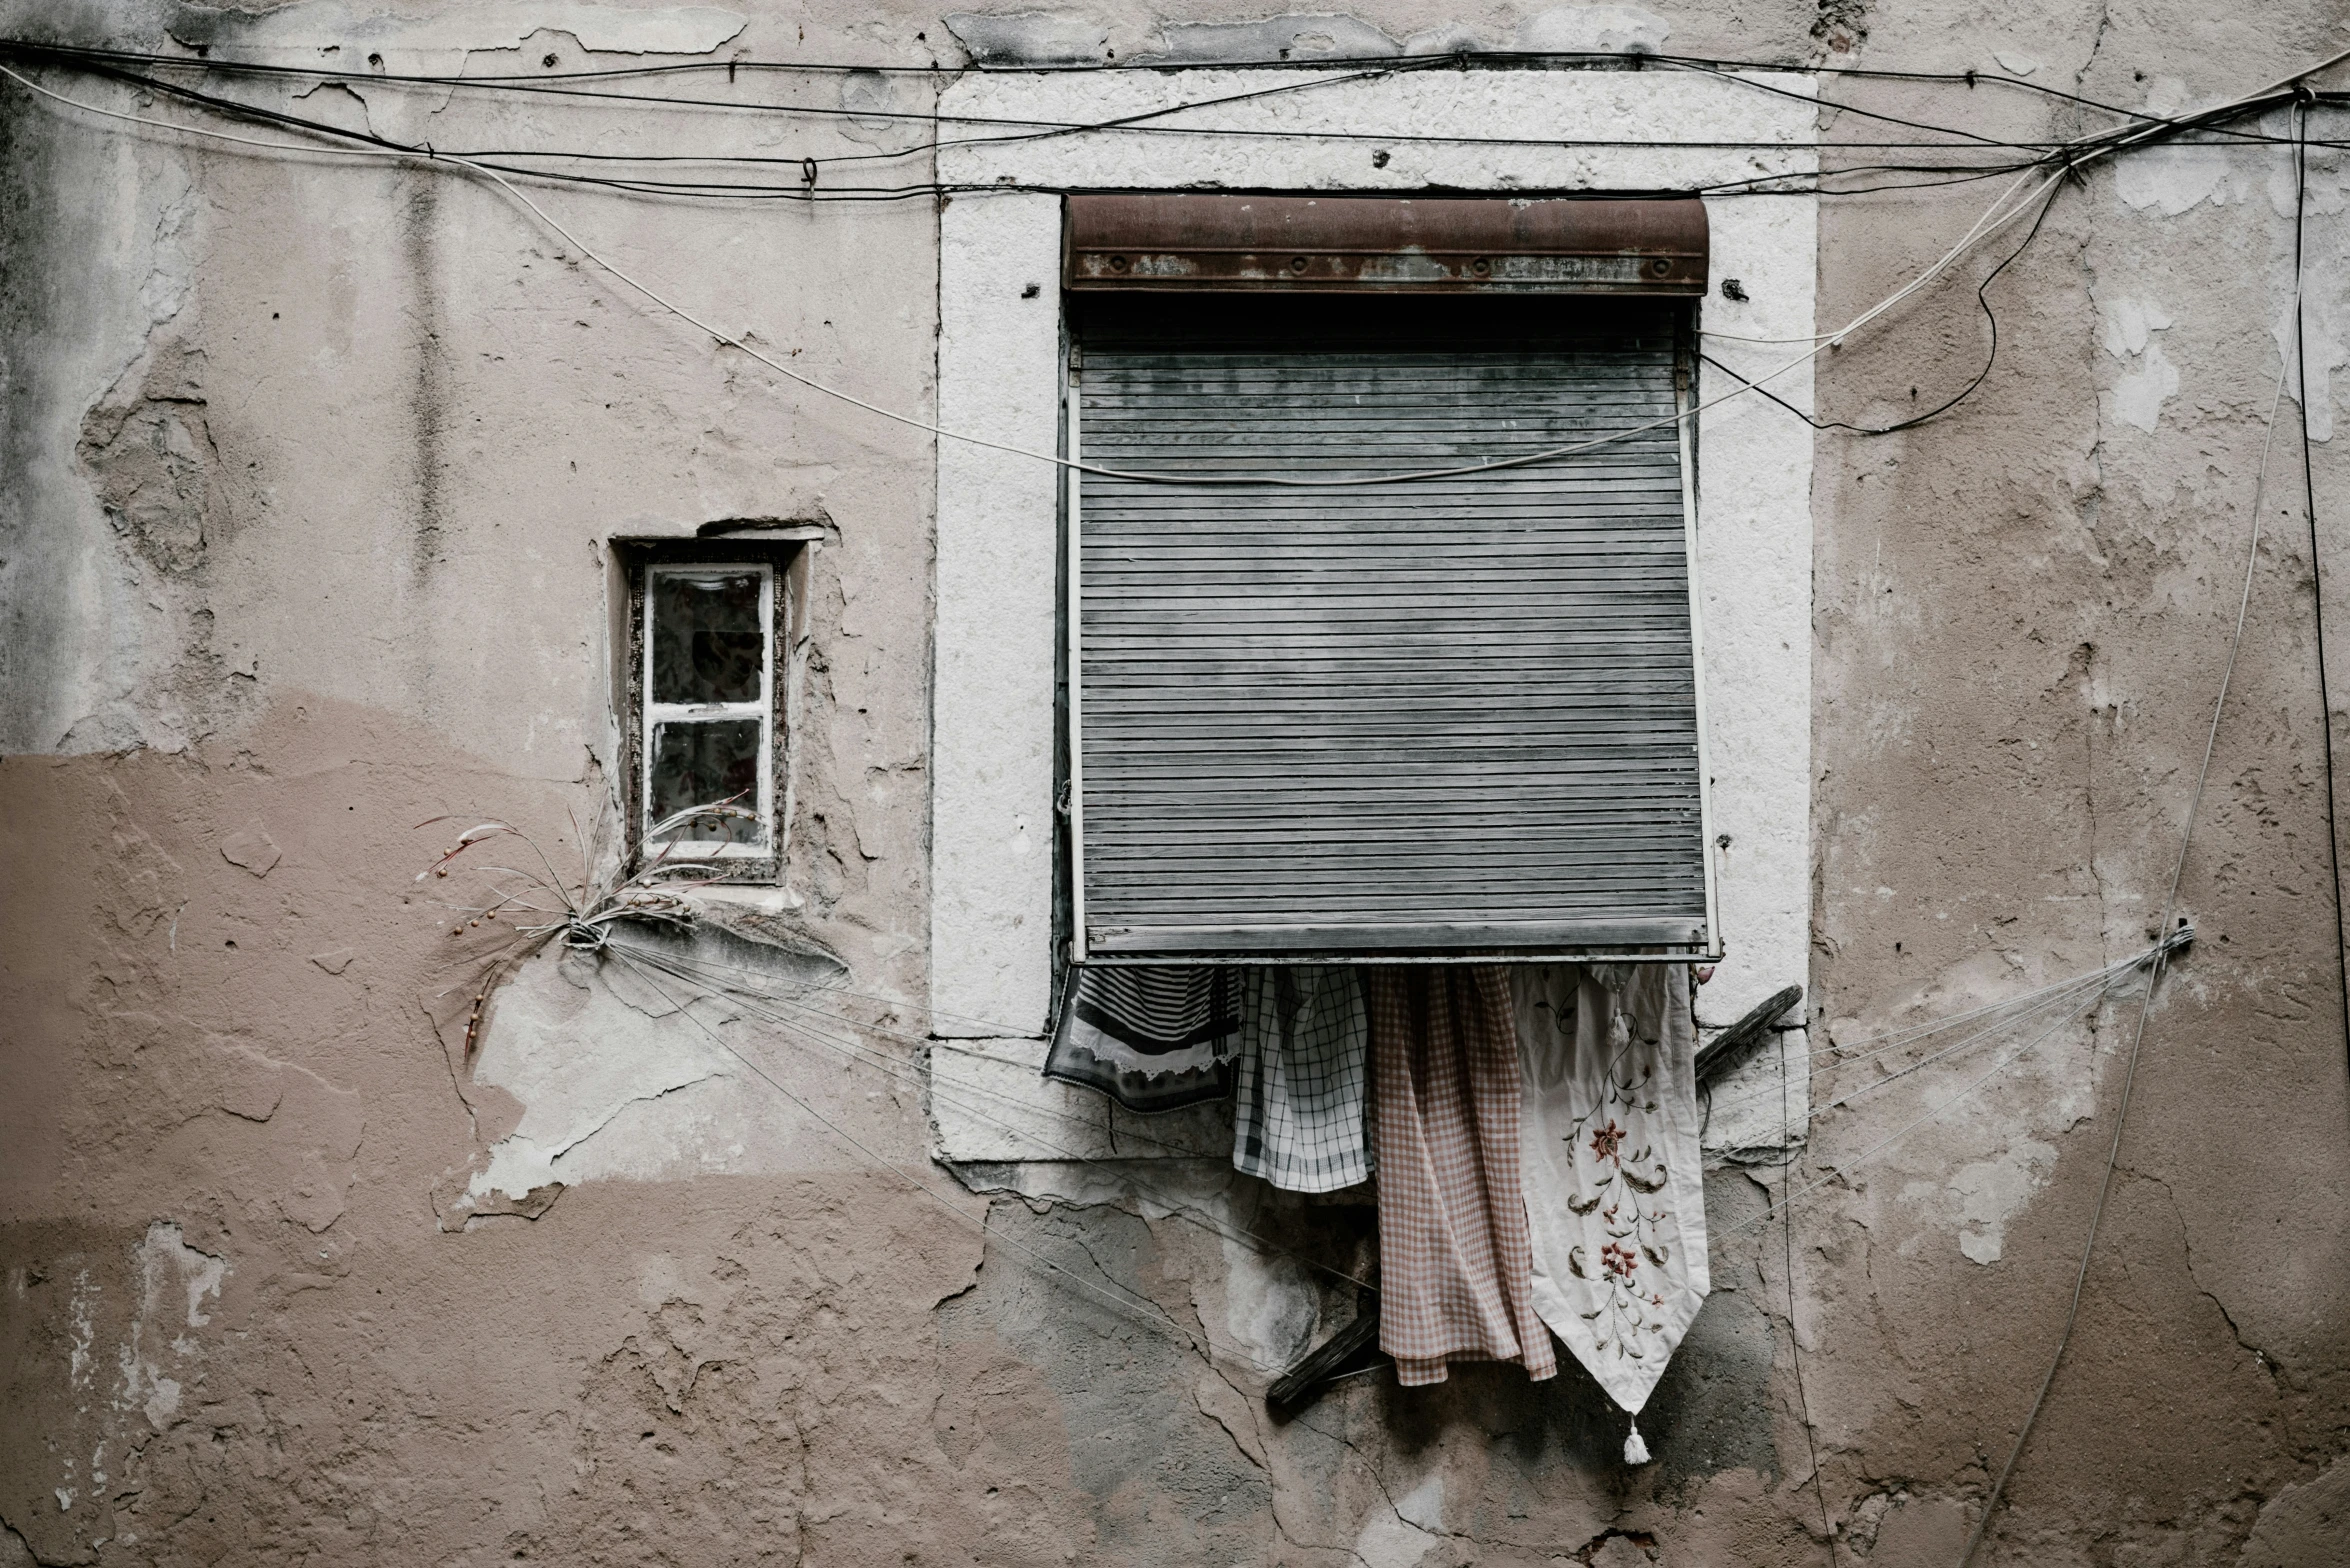 two different kinds of cloth hang from a wire hanging out of an open window